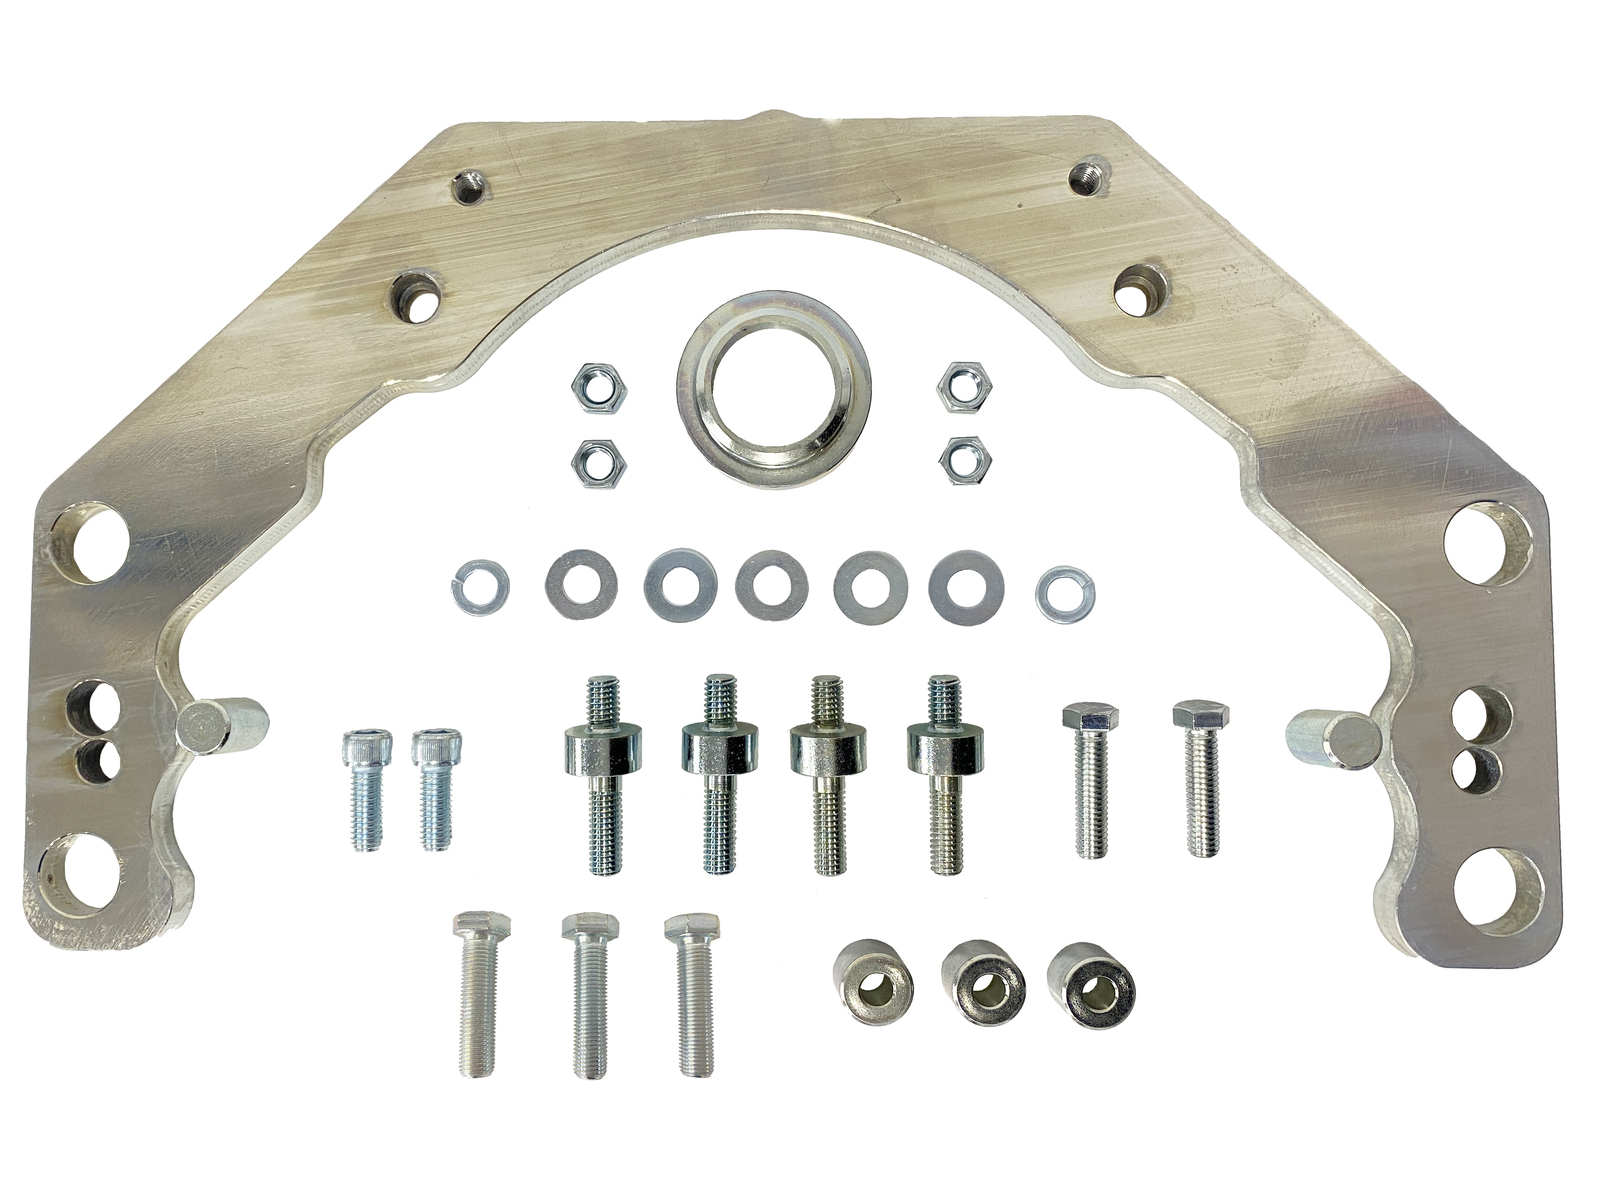 How to install your gearbox kit for 308 ? 